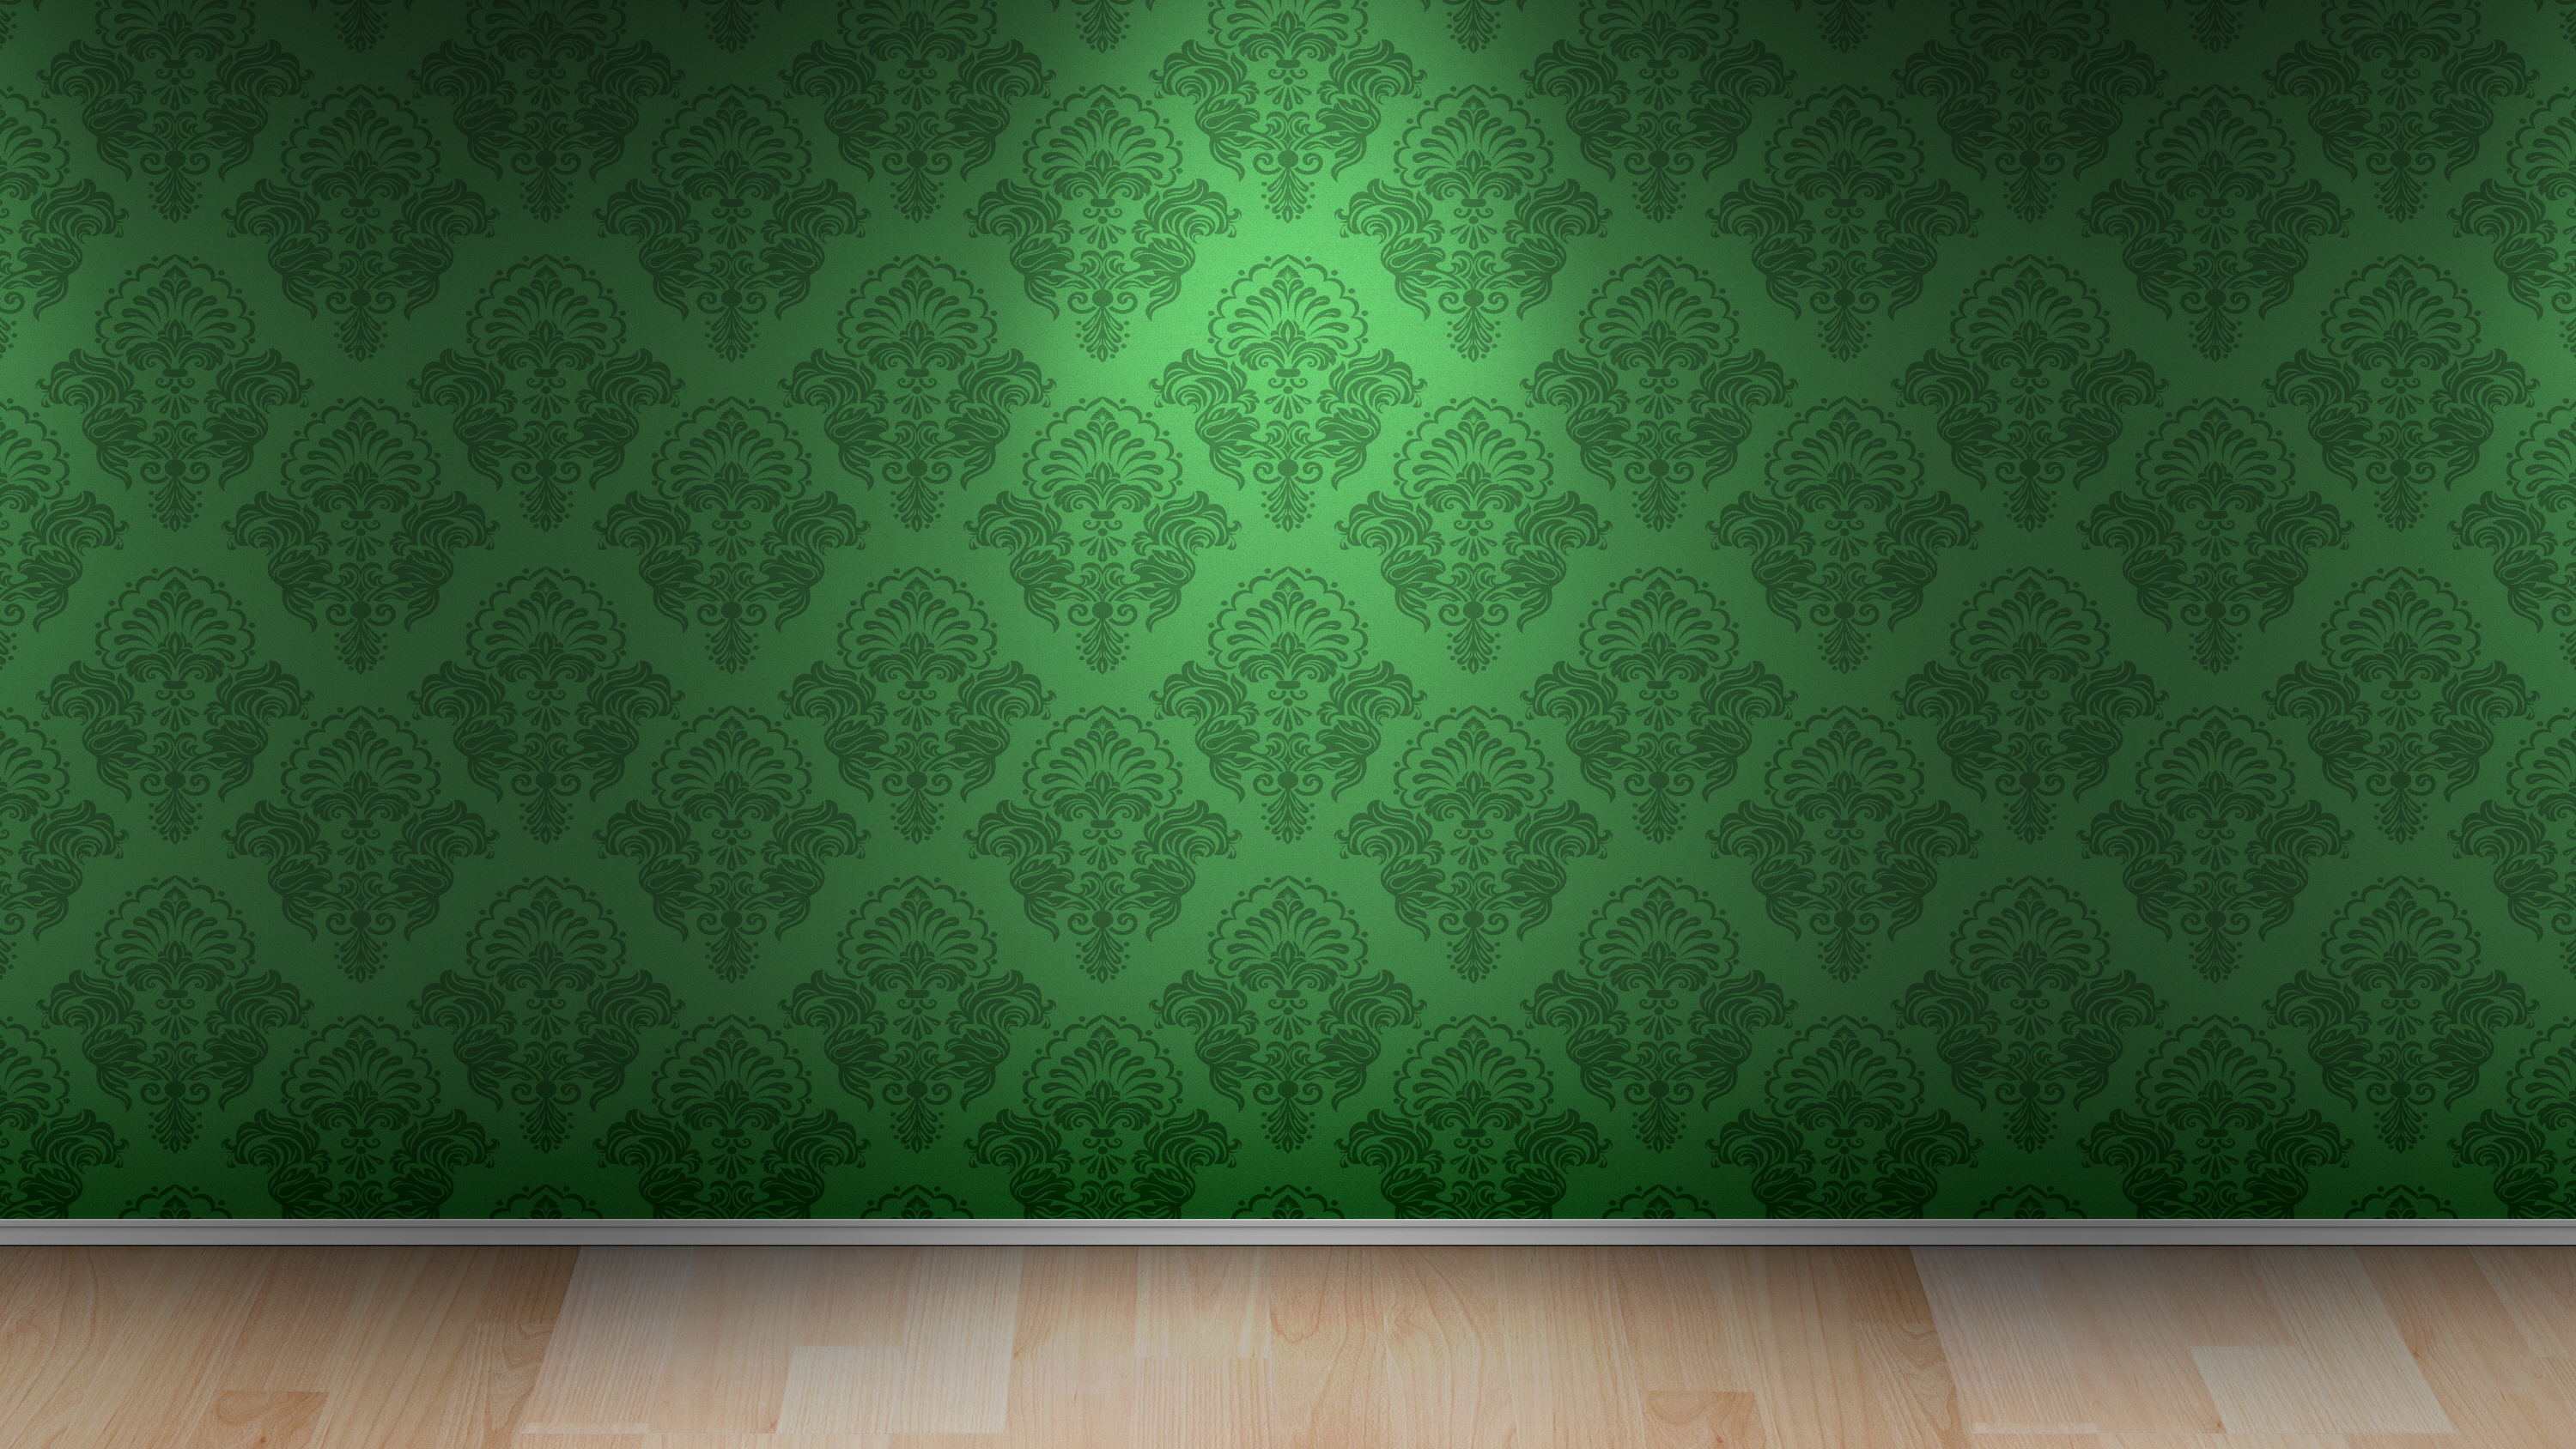 General 3000x1688 wall pattern texture green background